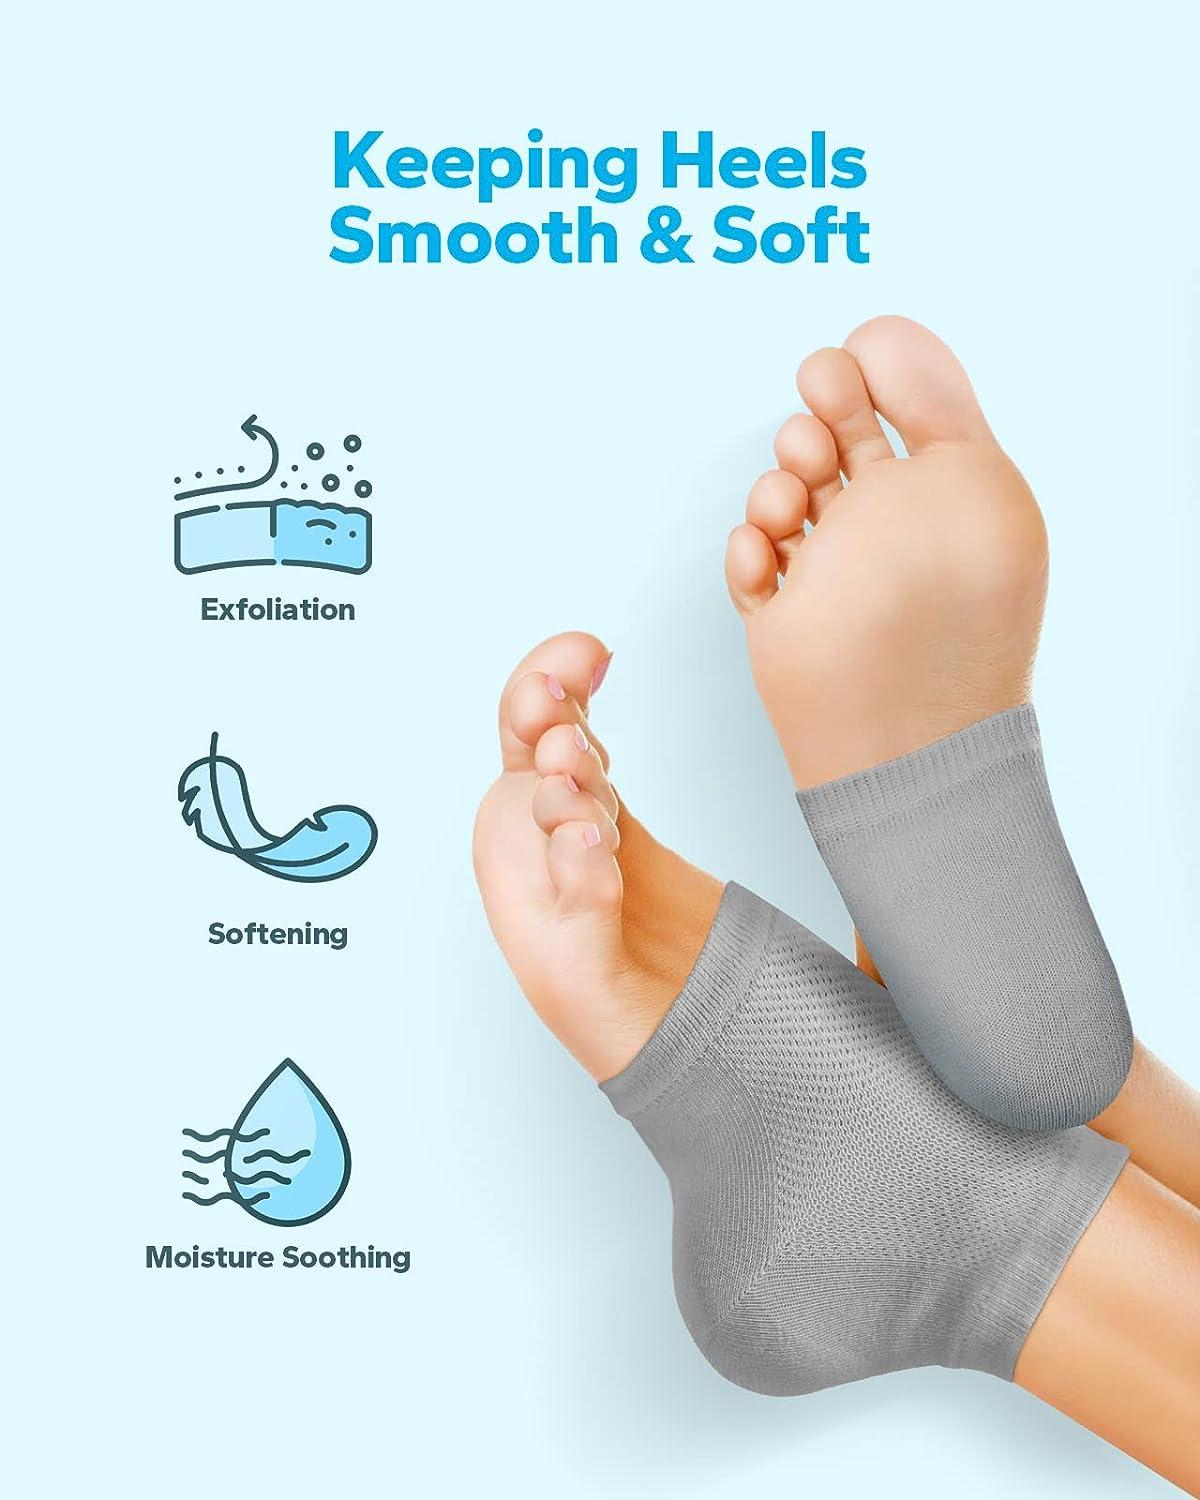 Moisturizing Socks for Mens Cracked Heels - Moisturizer Heel Sleeves to  Smooth & Soften Rough Cracked Heels & Dry Feet. Large Aloe Moisturizing  Heel Socks with Lotion Infused Gel Socks (XL - 3 Pairs)